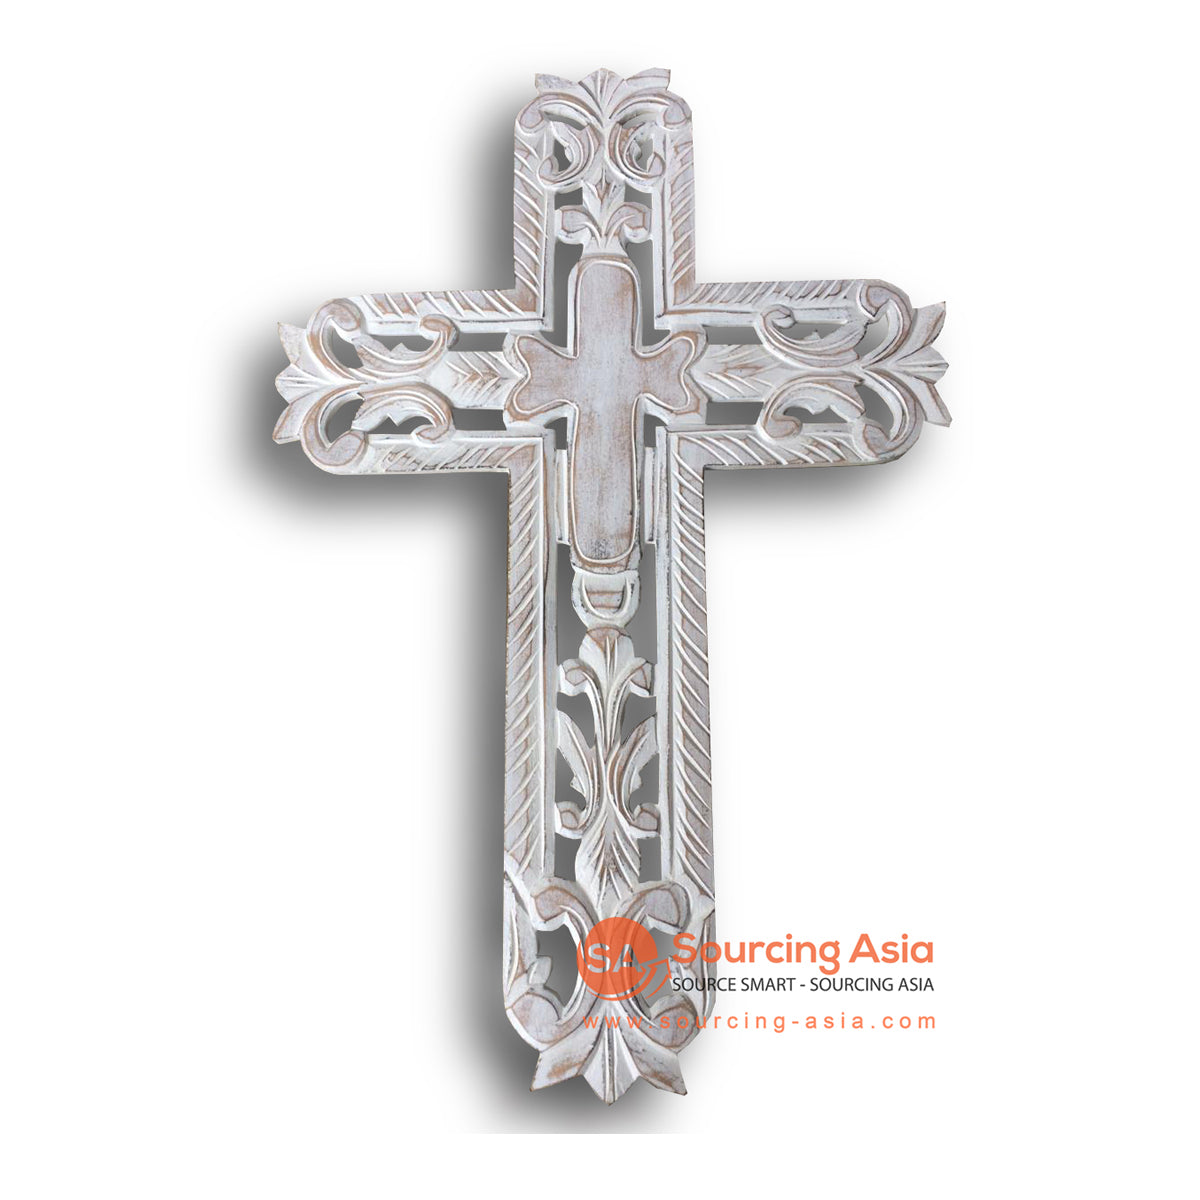 LUH045-1WW WHITE WASH WOODEN CARVED CROSS DECORATION